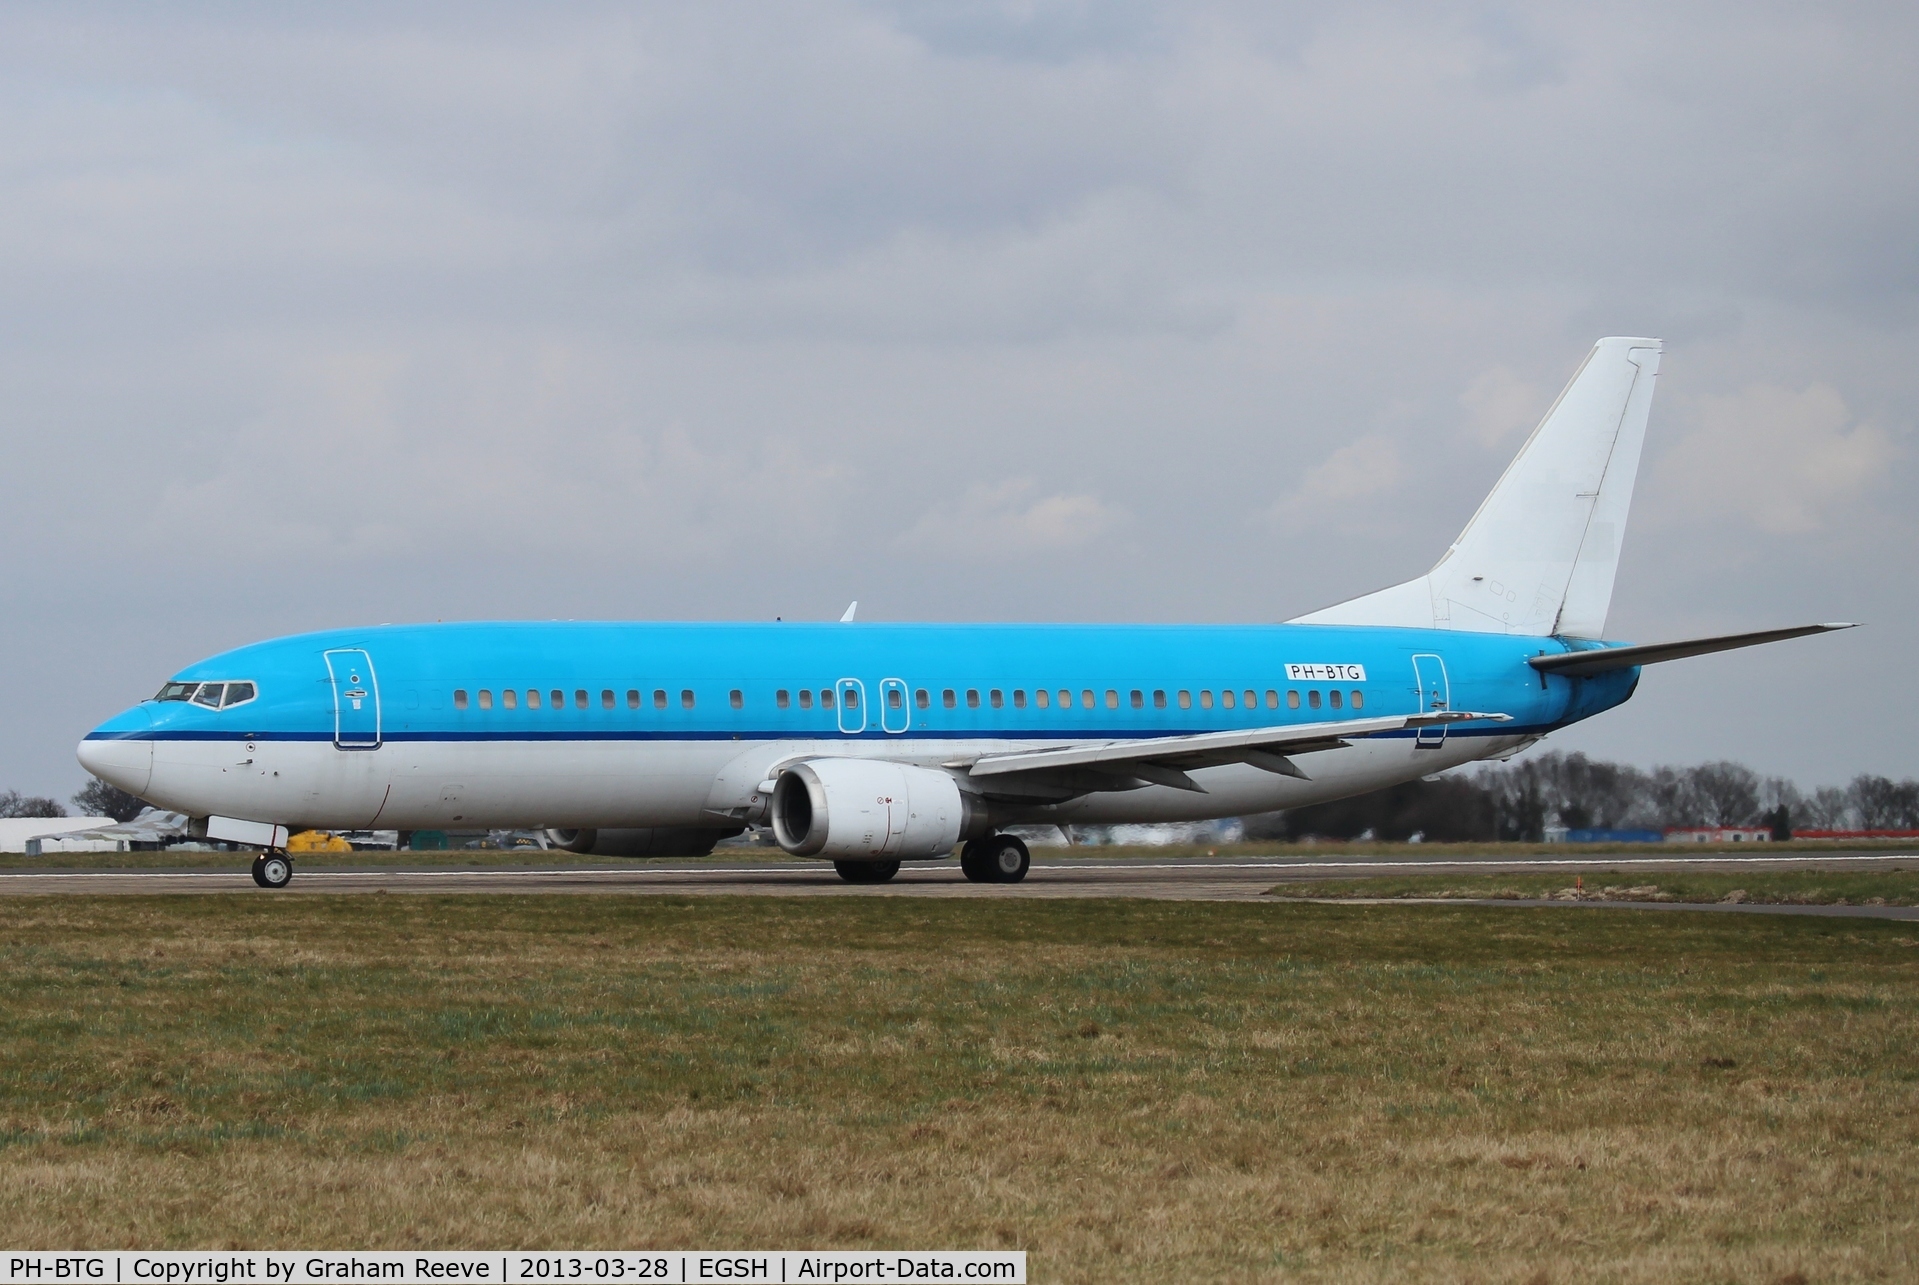 PH-BTG, 1994 Boeing 737-406 C/N 27233, This former KLM aircraft is about to depart on runway 09.